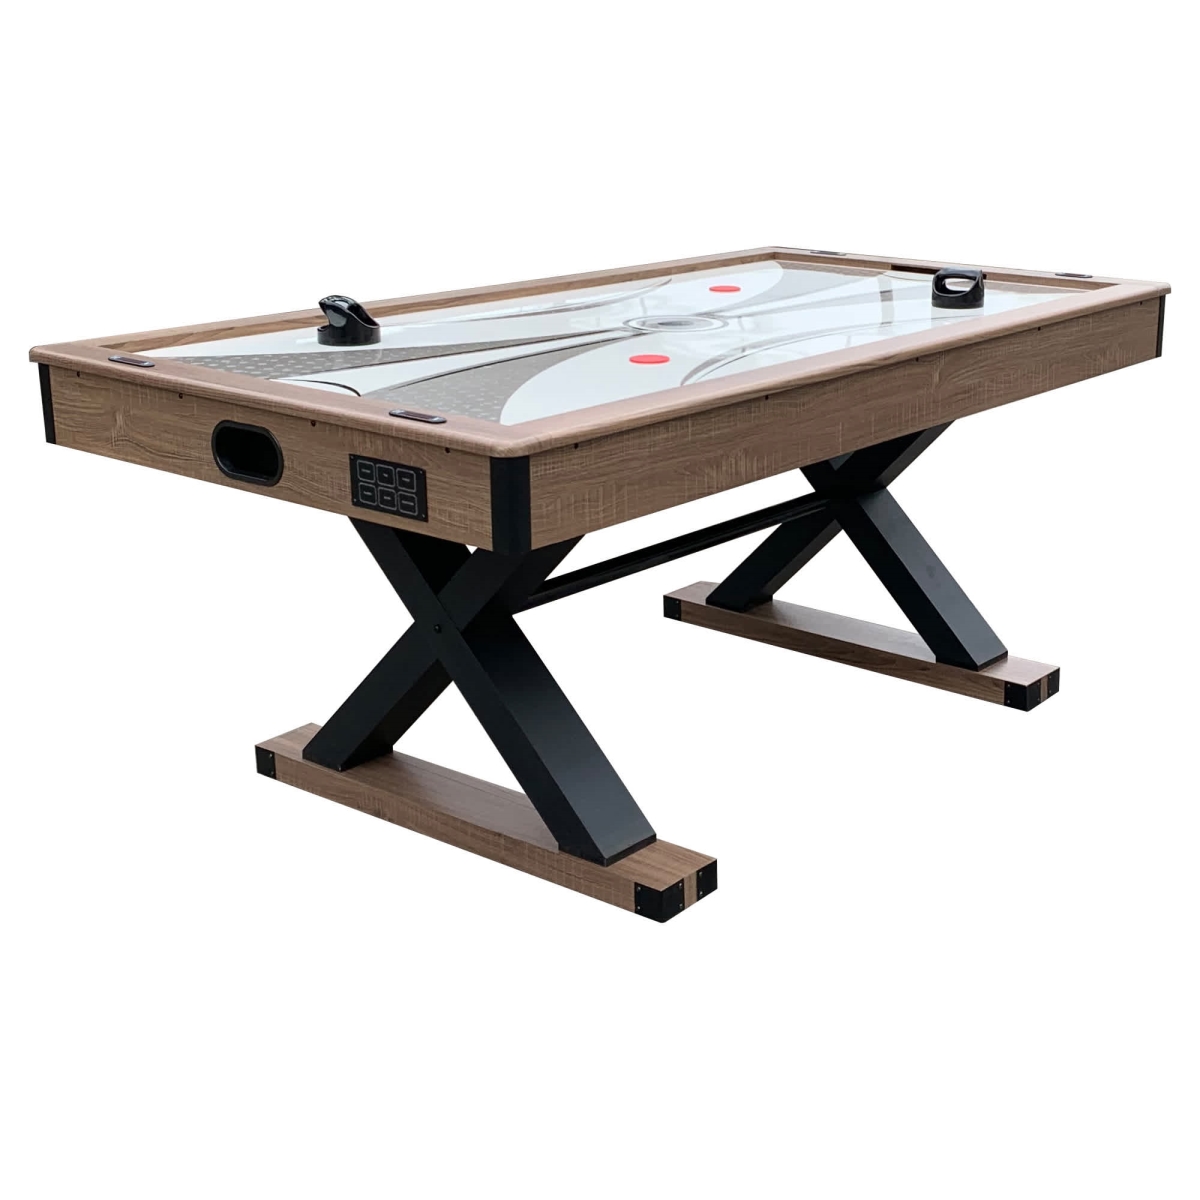 Picture of Blue Wave BG50337 6 ft. Excalibur Air Hockey Table with Table Tennis Top